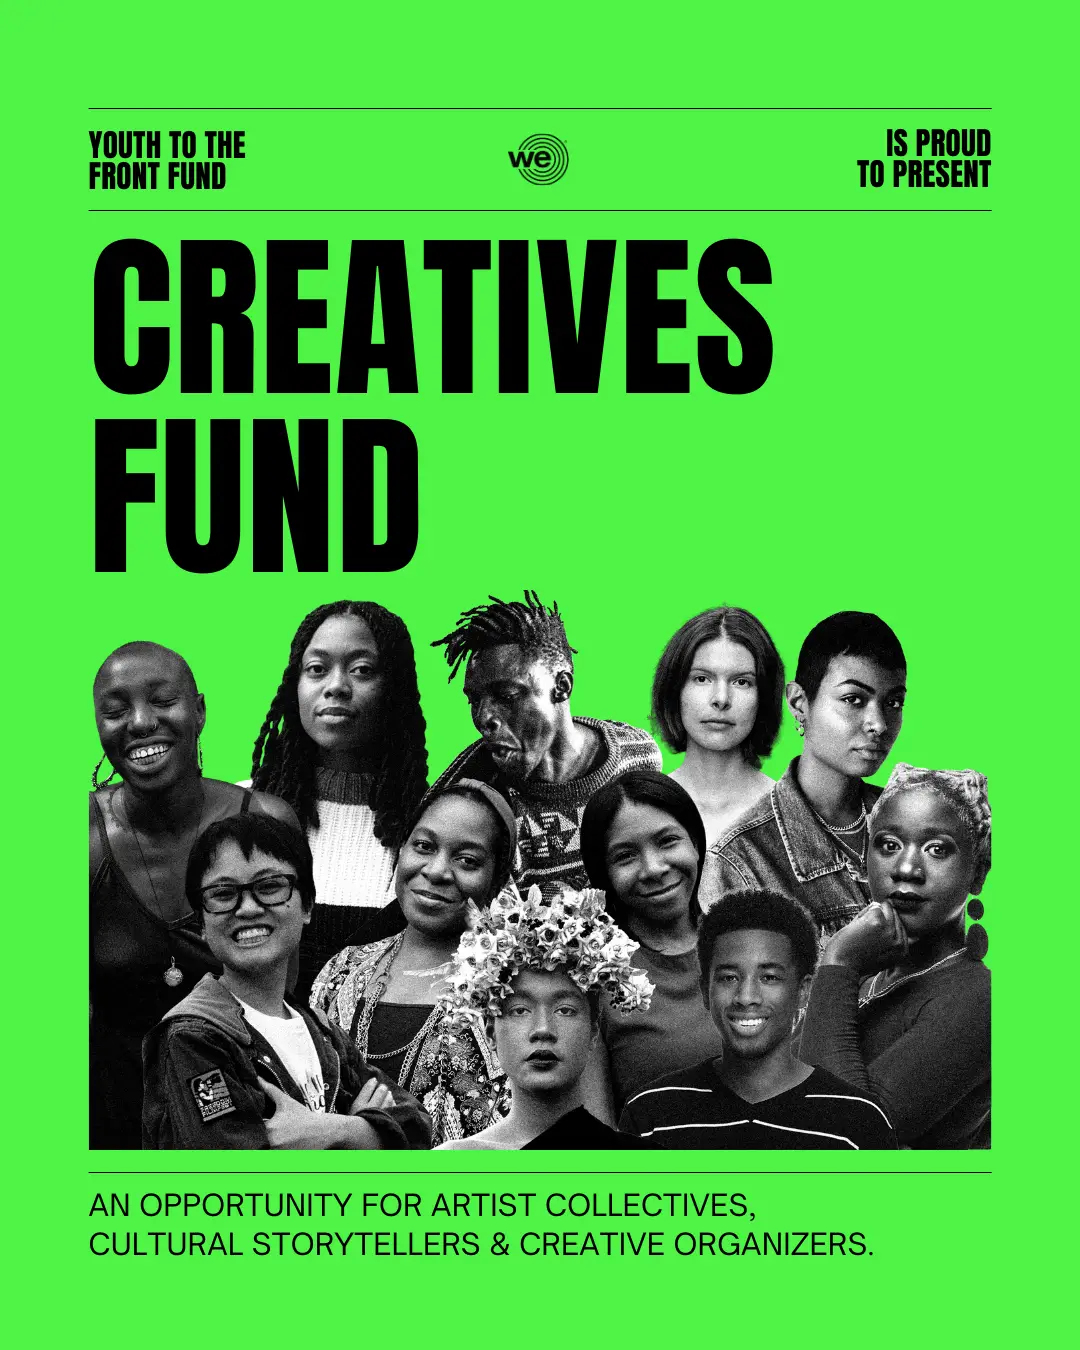 Applications Invited for Youth To The Front Fund’s Creatives Fund 2023